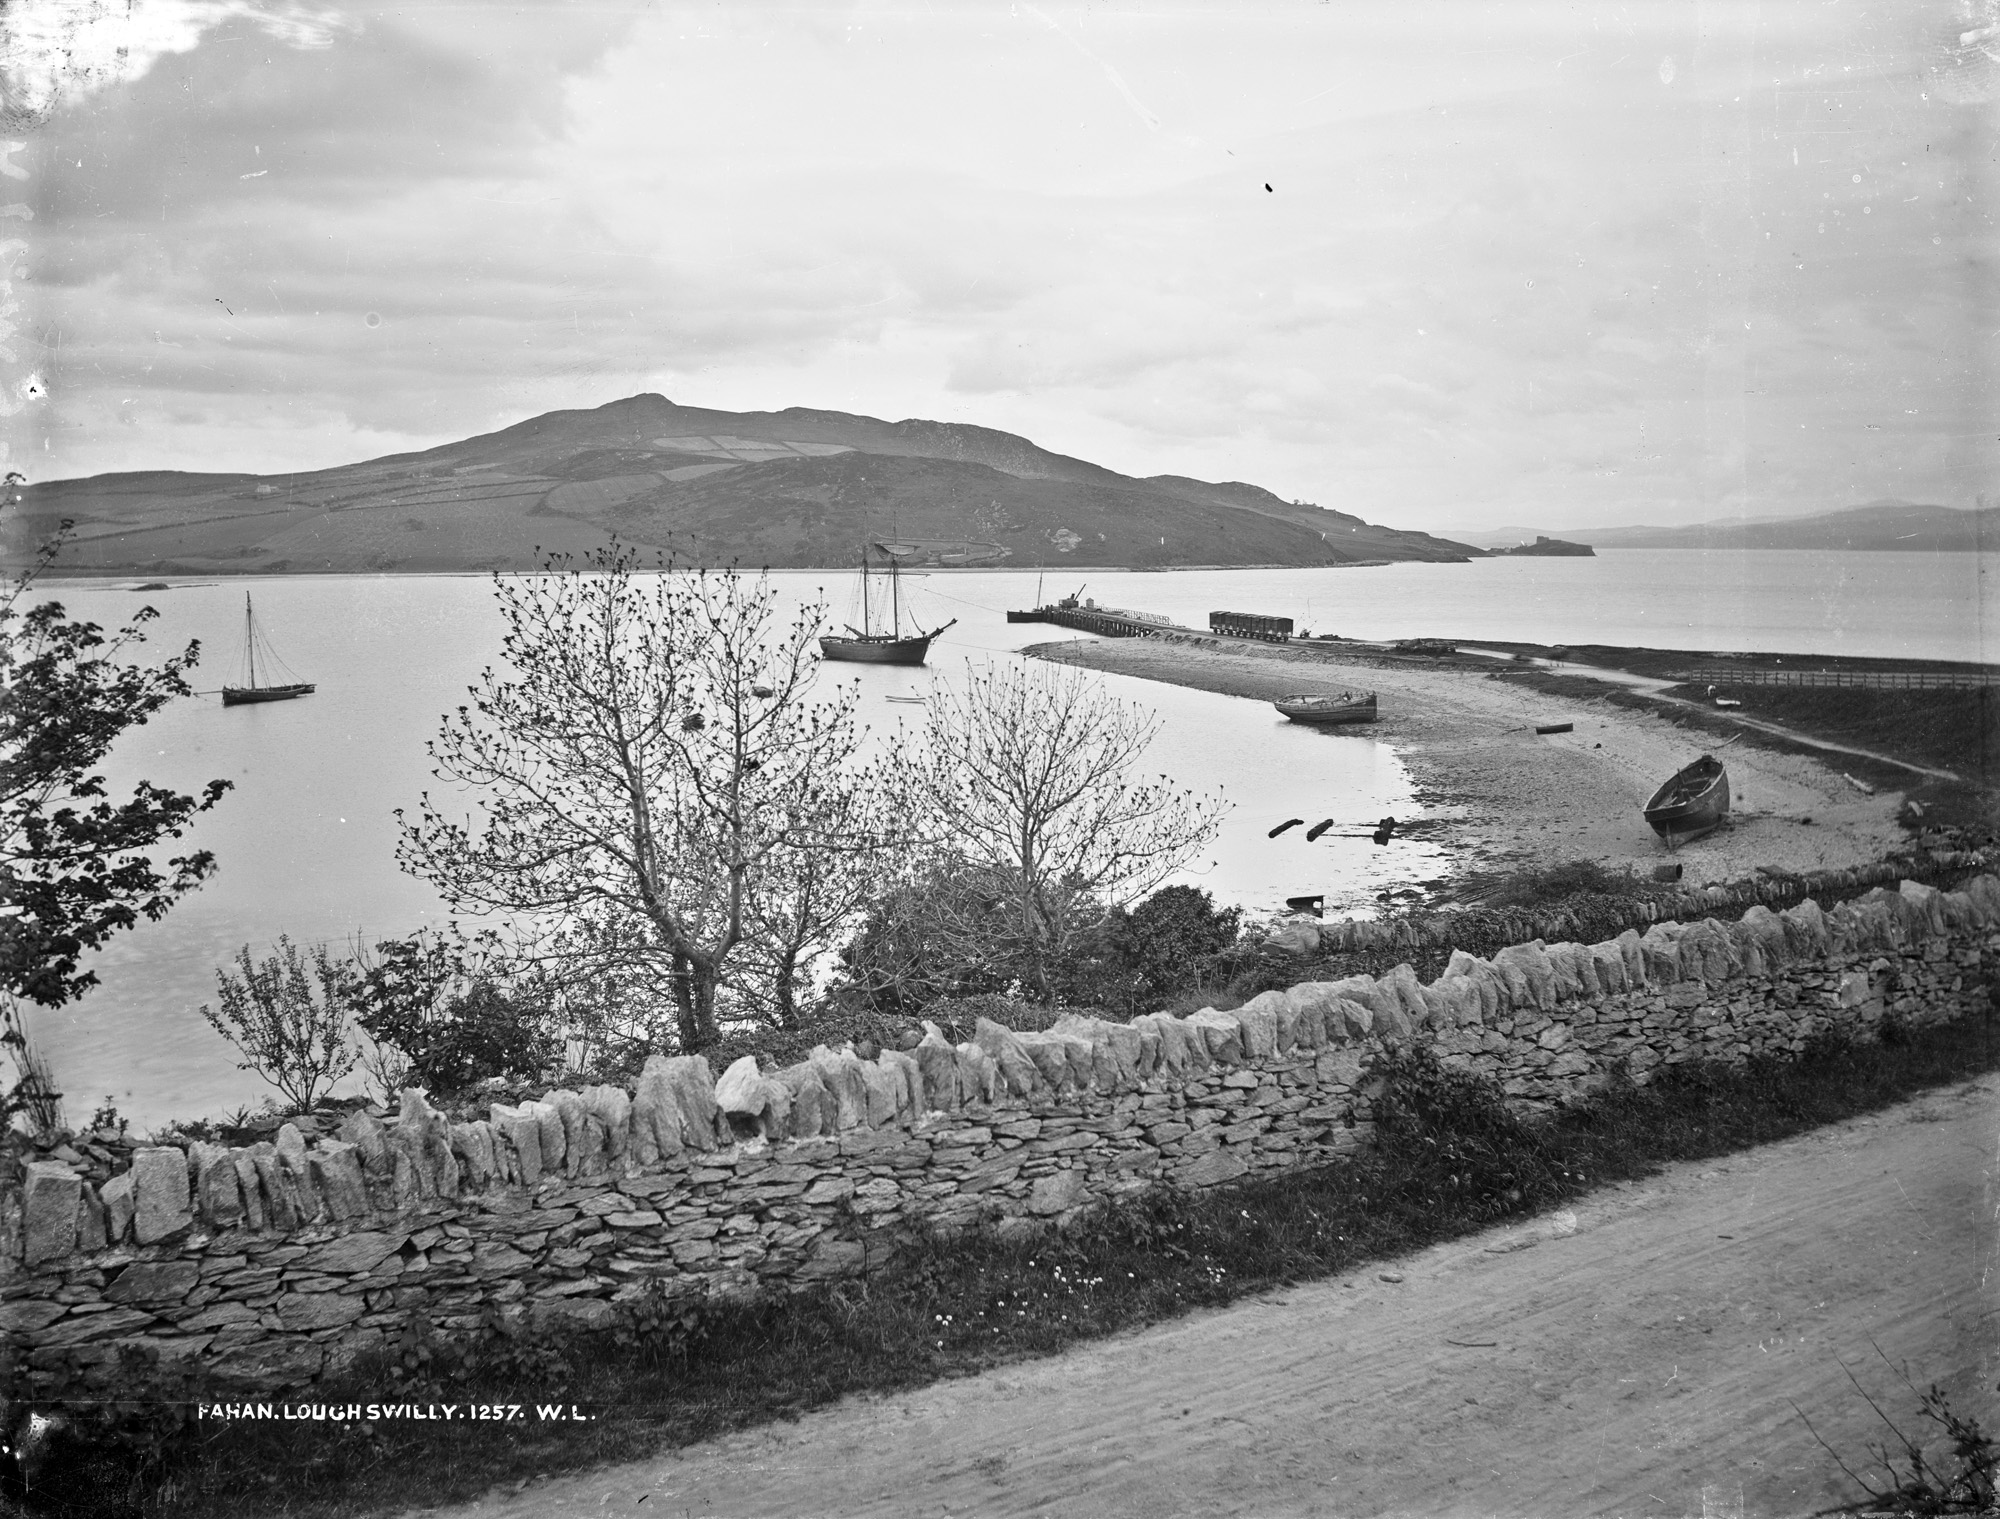 Fahan in Lough Swilly.